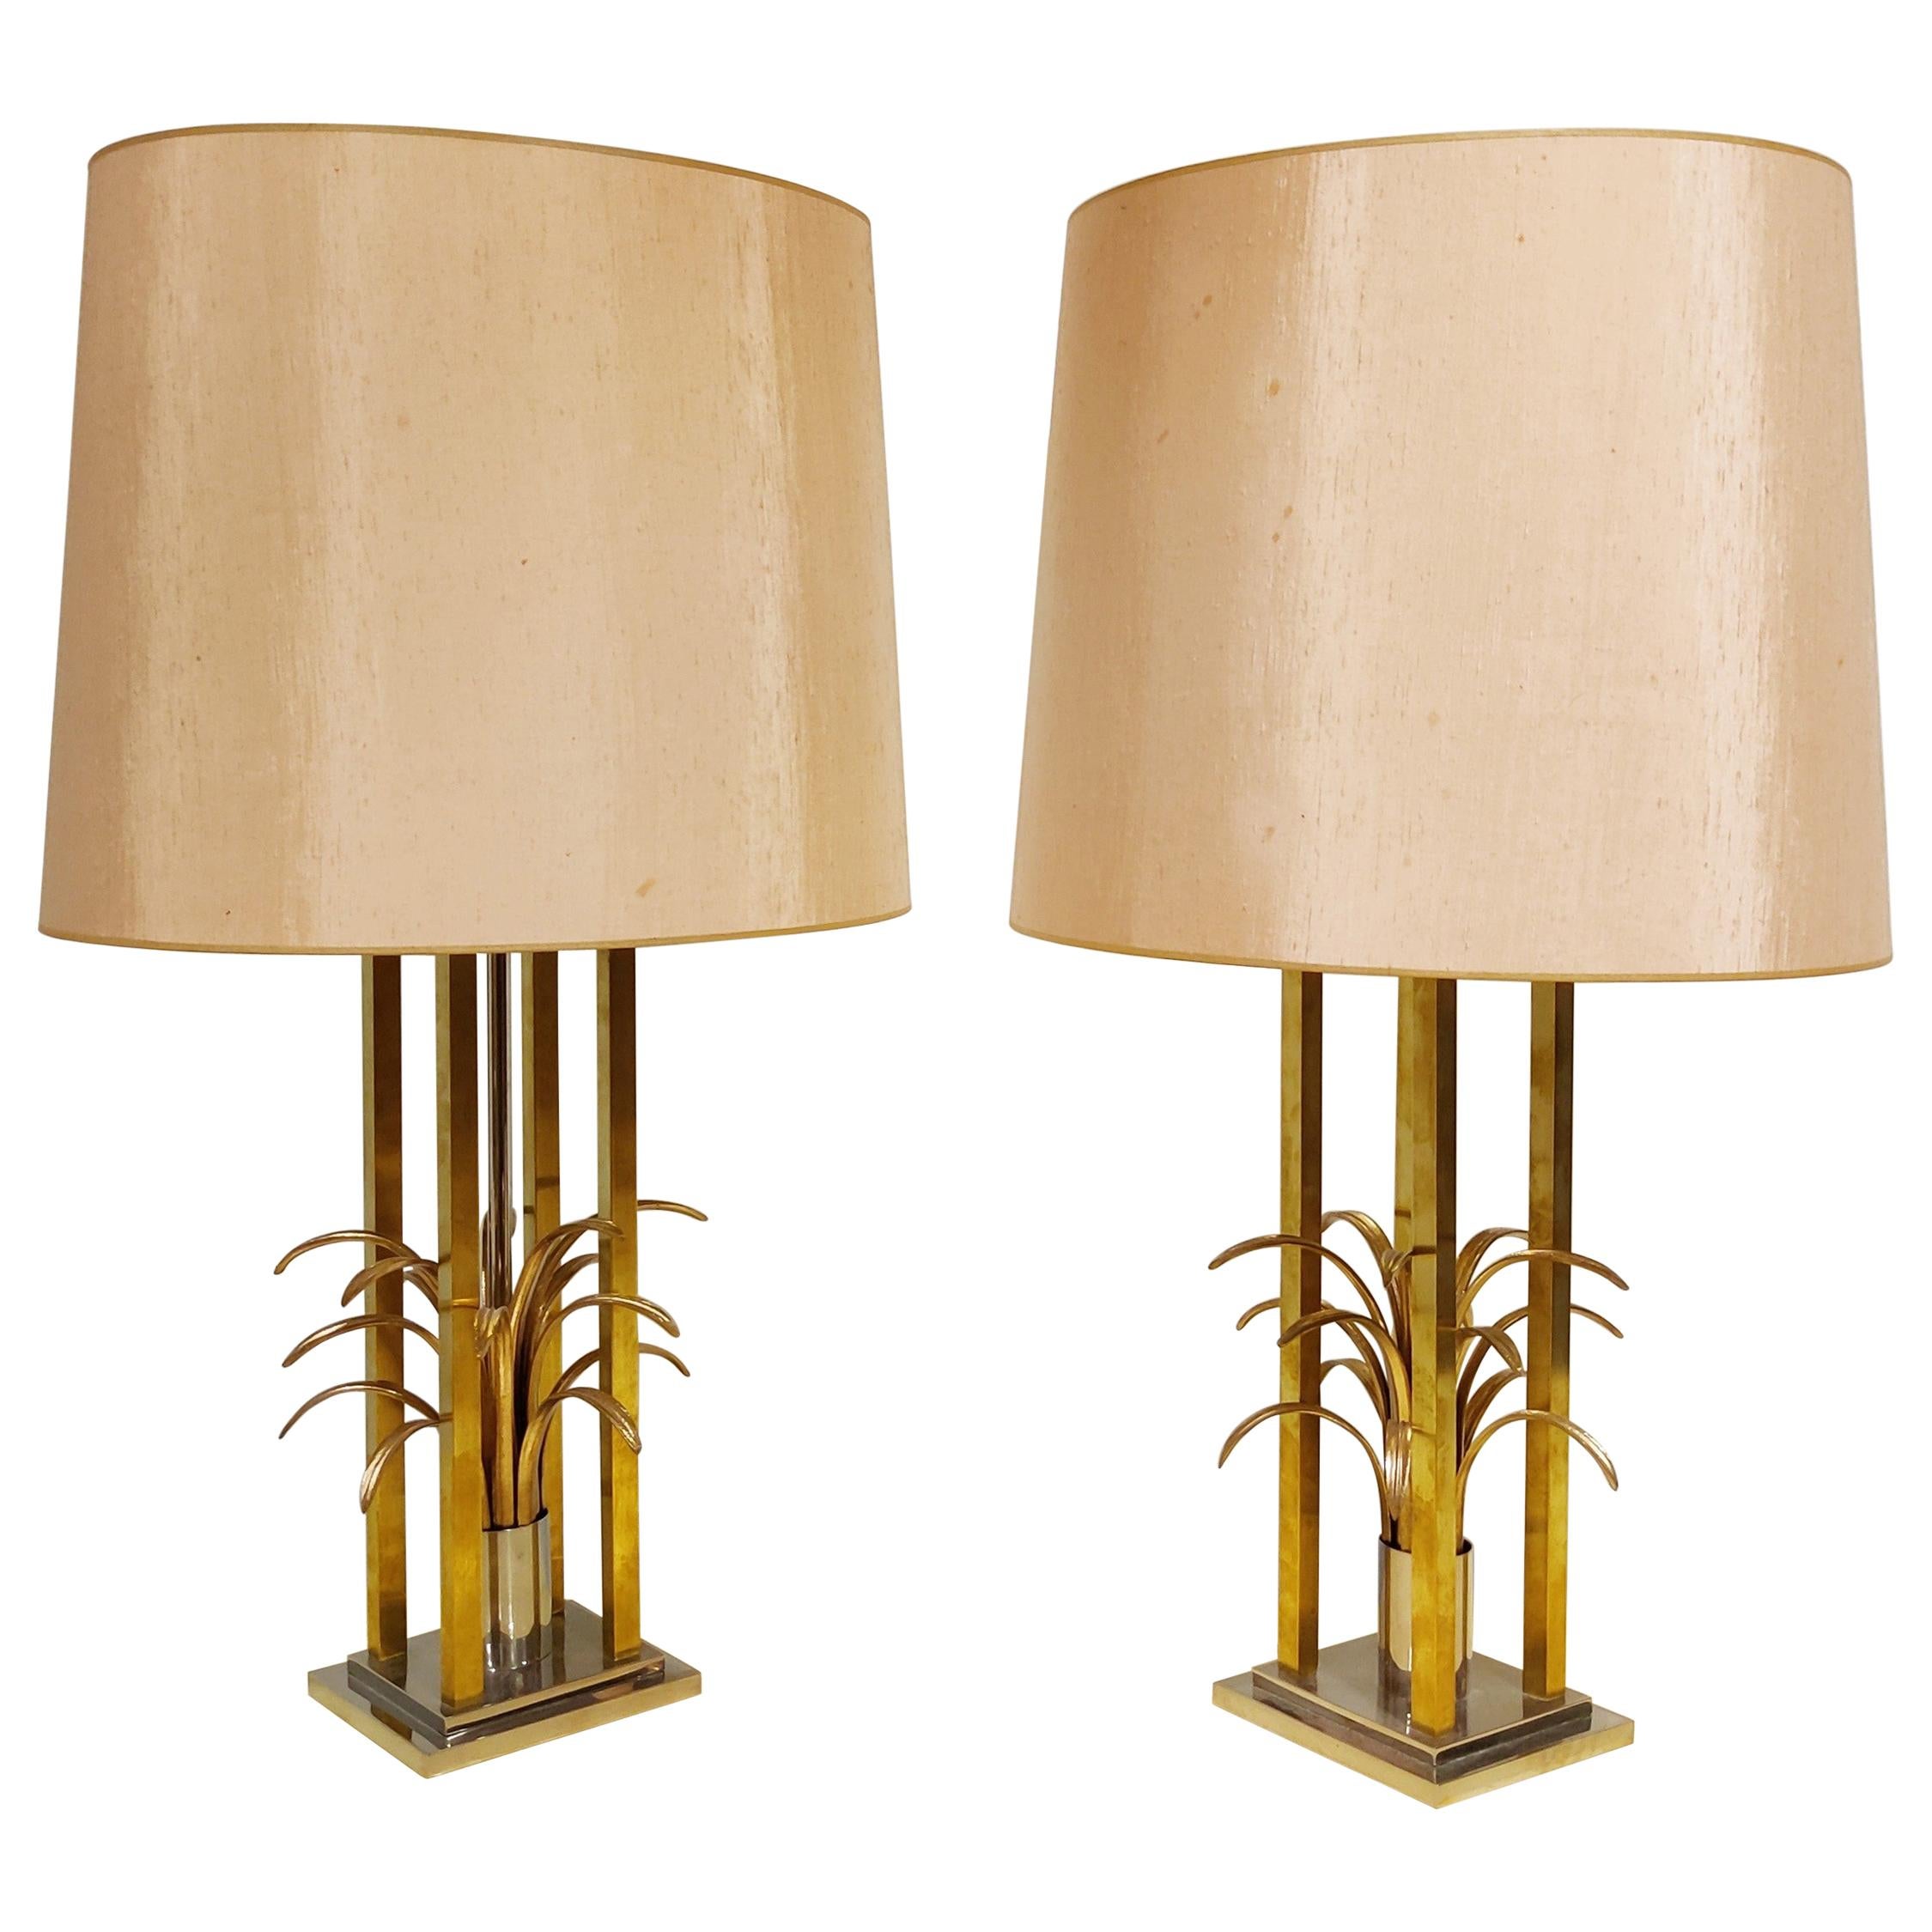 Vintage Brass Pineapple Table Lamps, 1970s